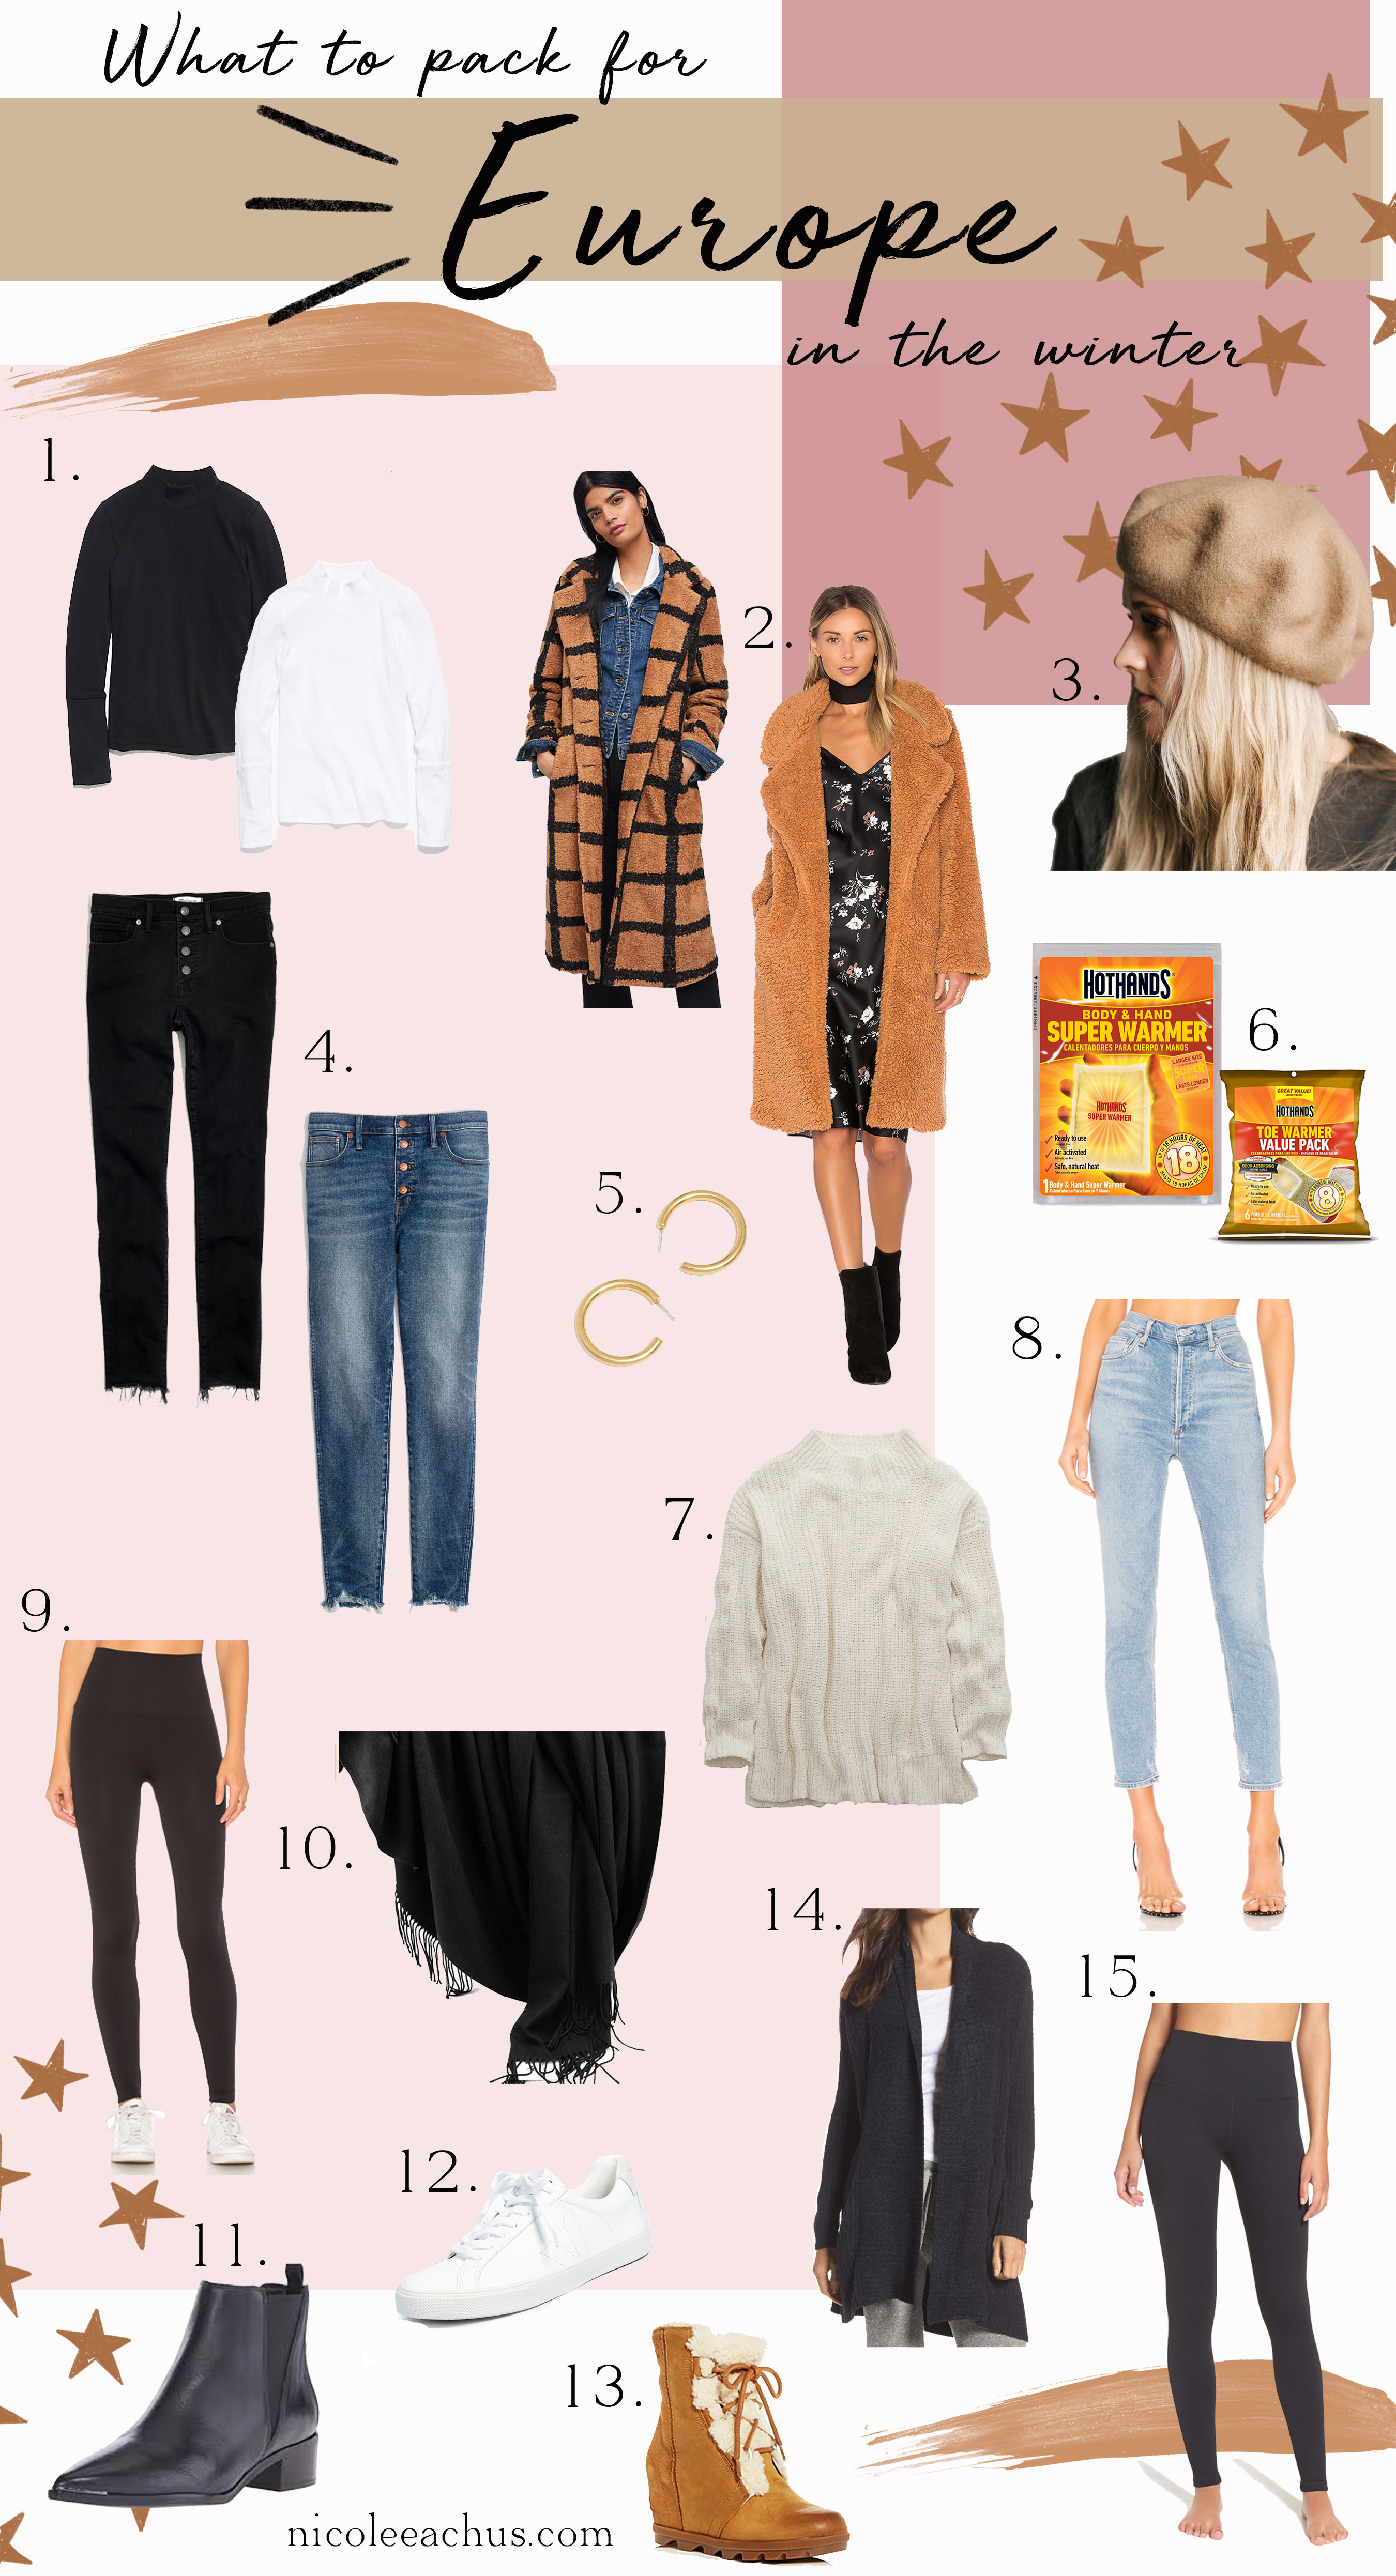 Nicole eachus, what to pack for winter, winter packing list, Europe travel, pack for Europe, what to wear in Paris, what to wear in Sweden, Amsterdam pack list